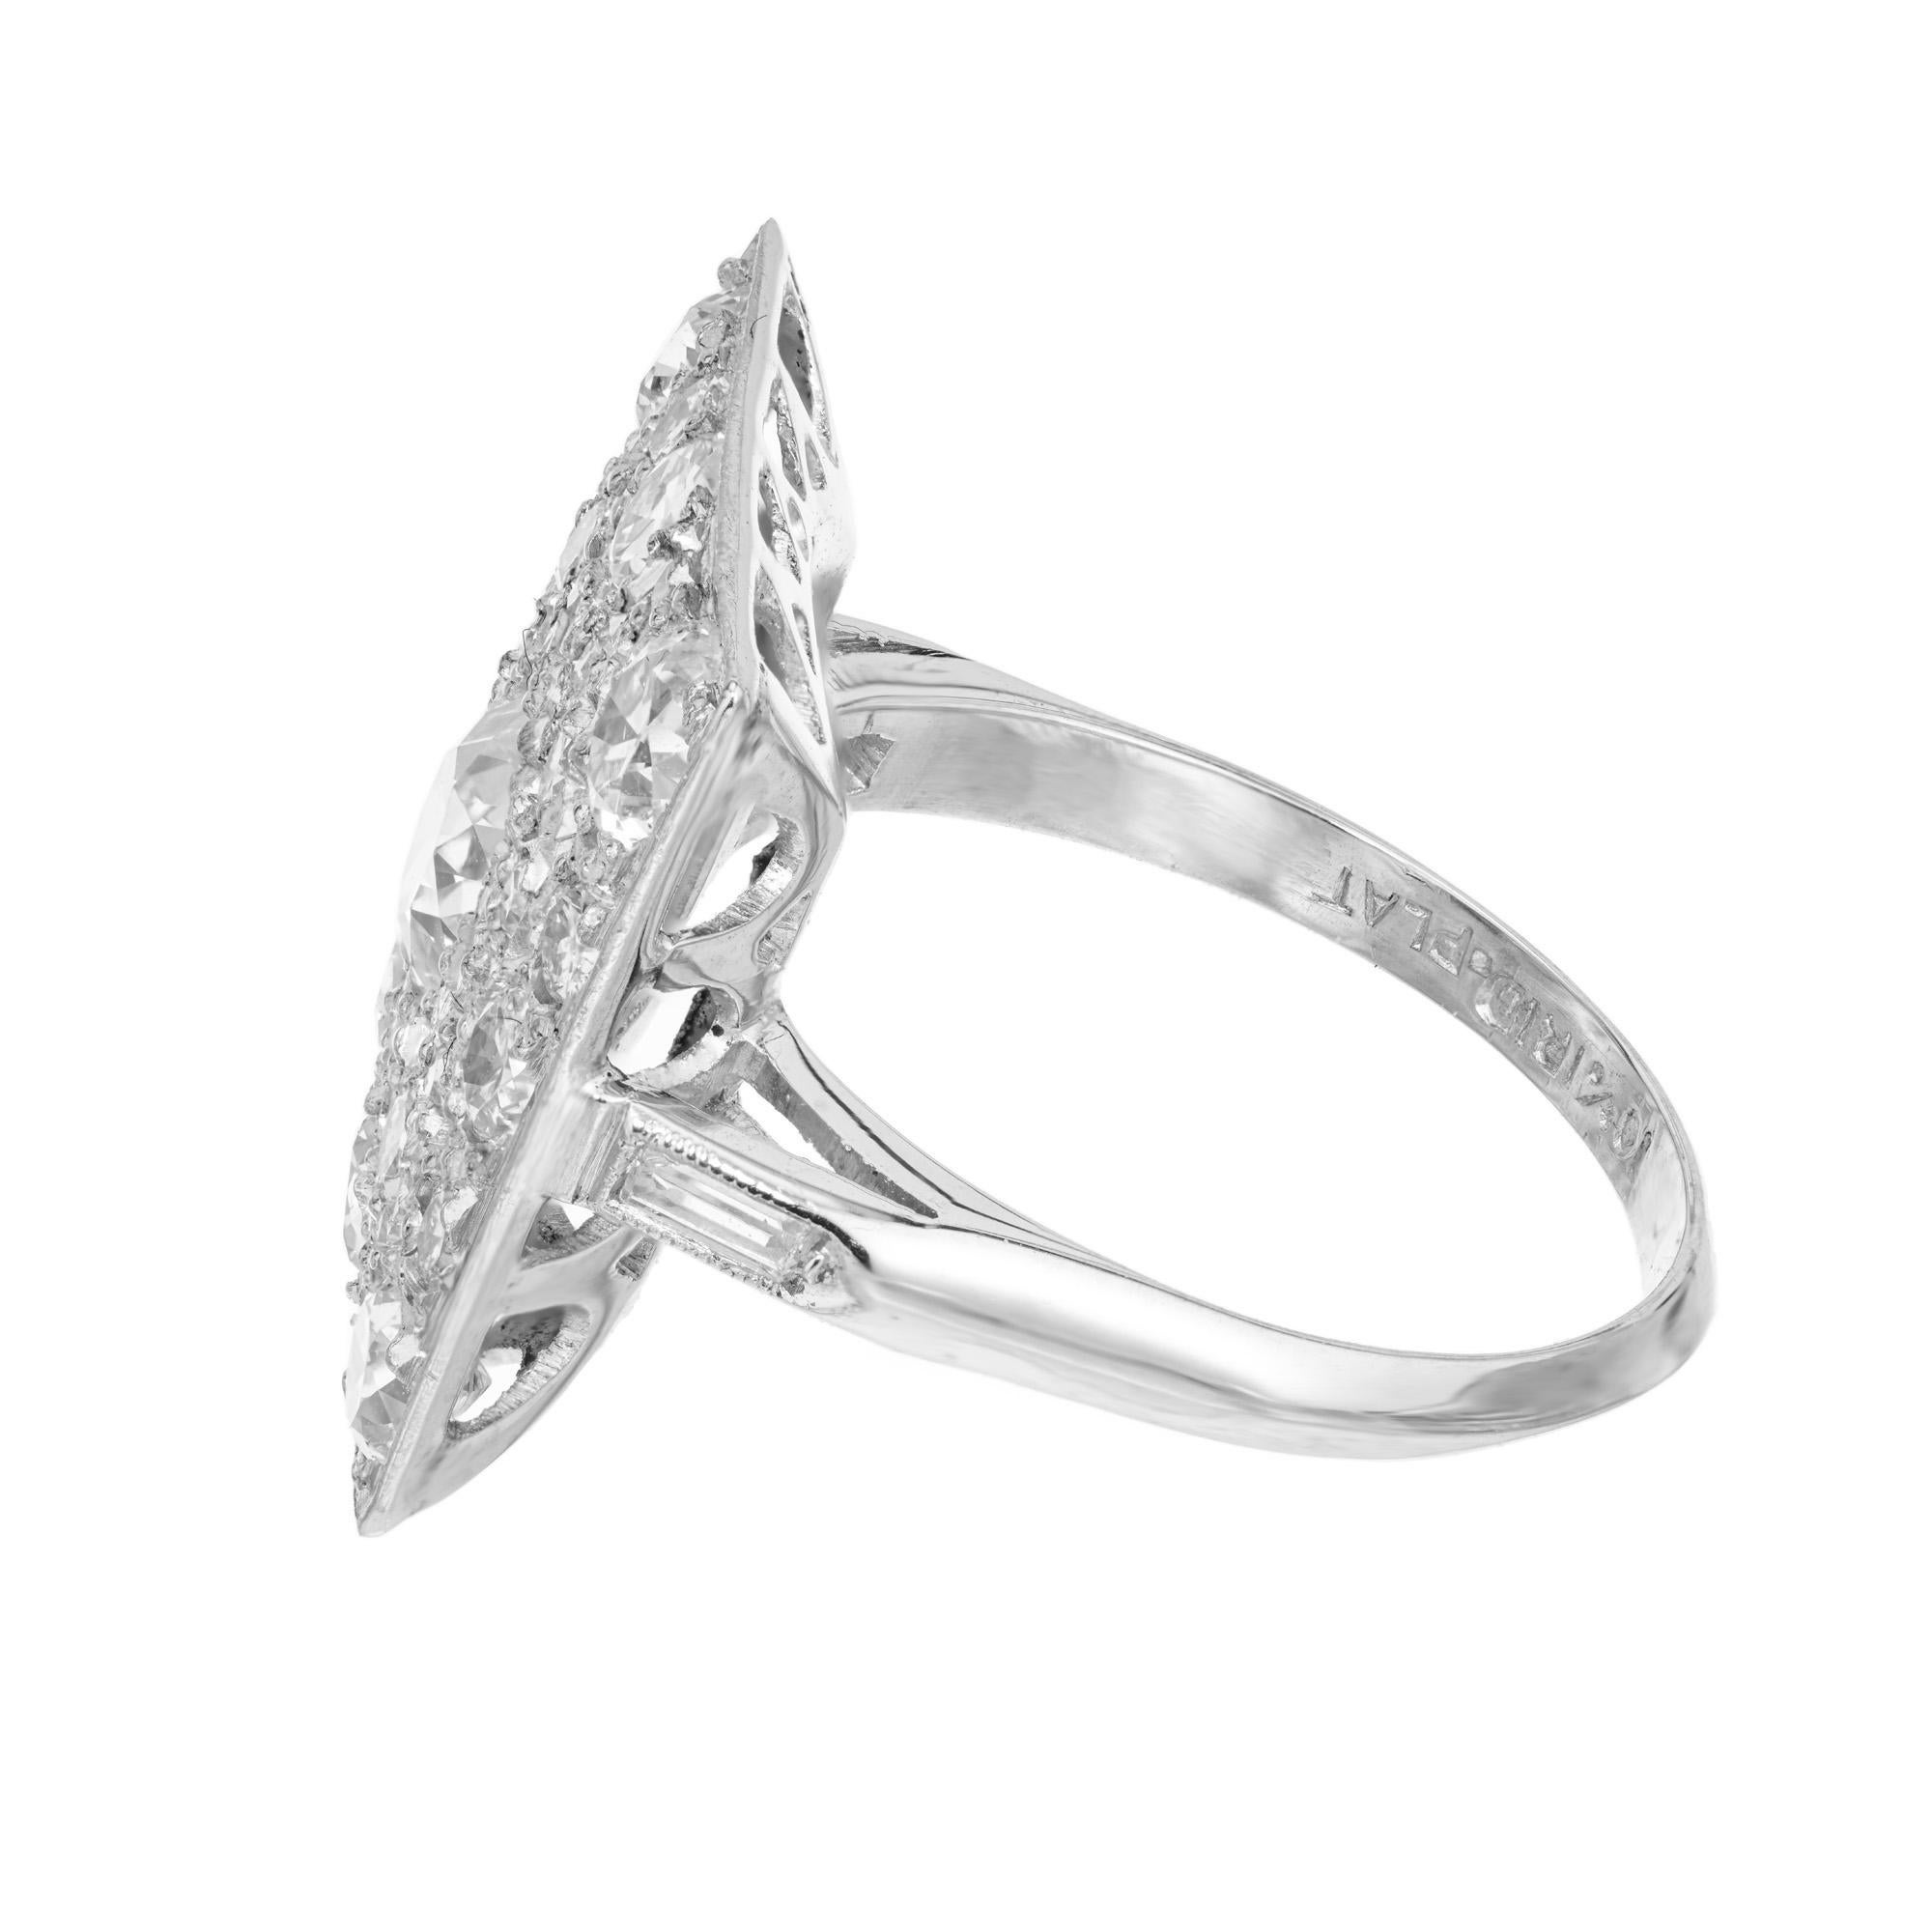 2.97 Carat Old European Cut Diamond Platinum Art Deco Cluster Cocktail Ring In Good Condition For Sale In Stamford, CT